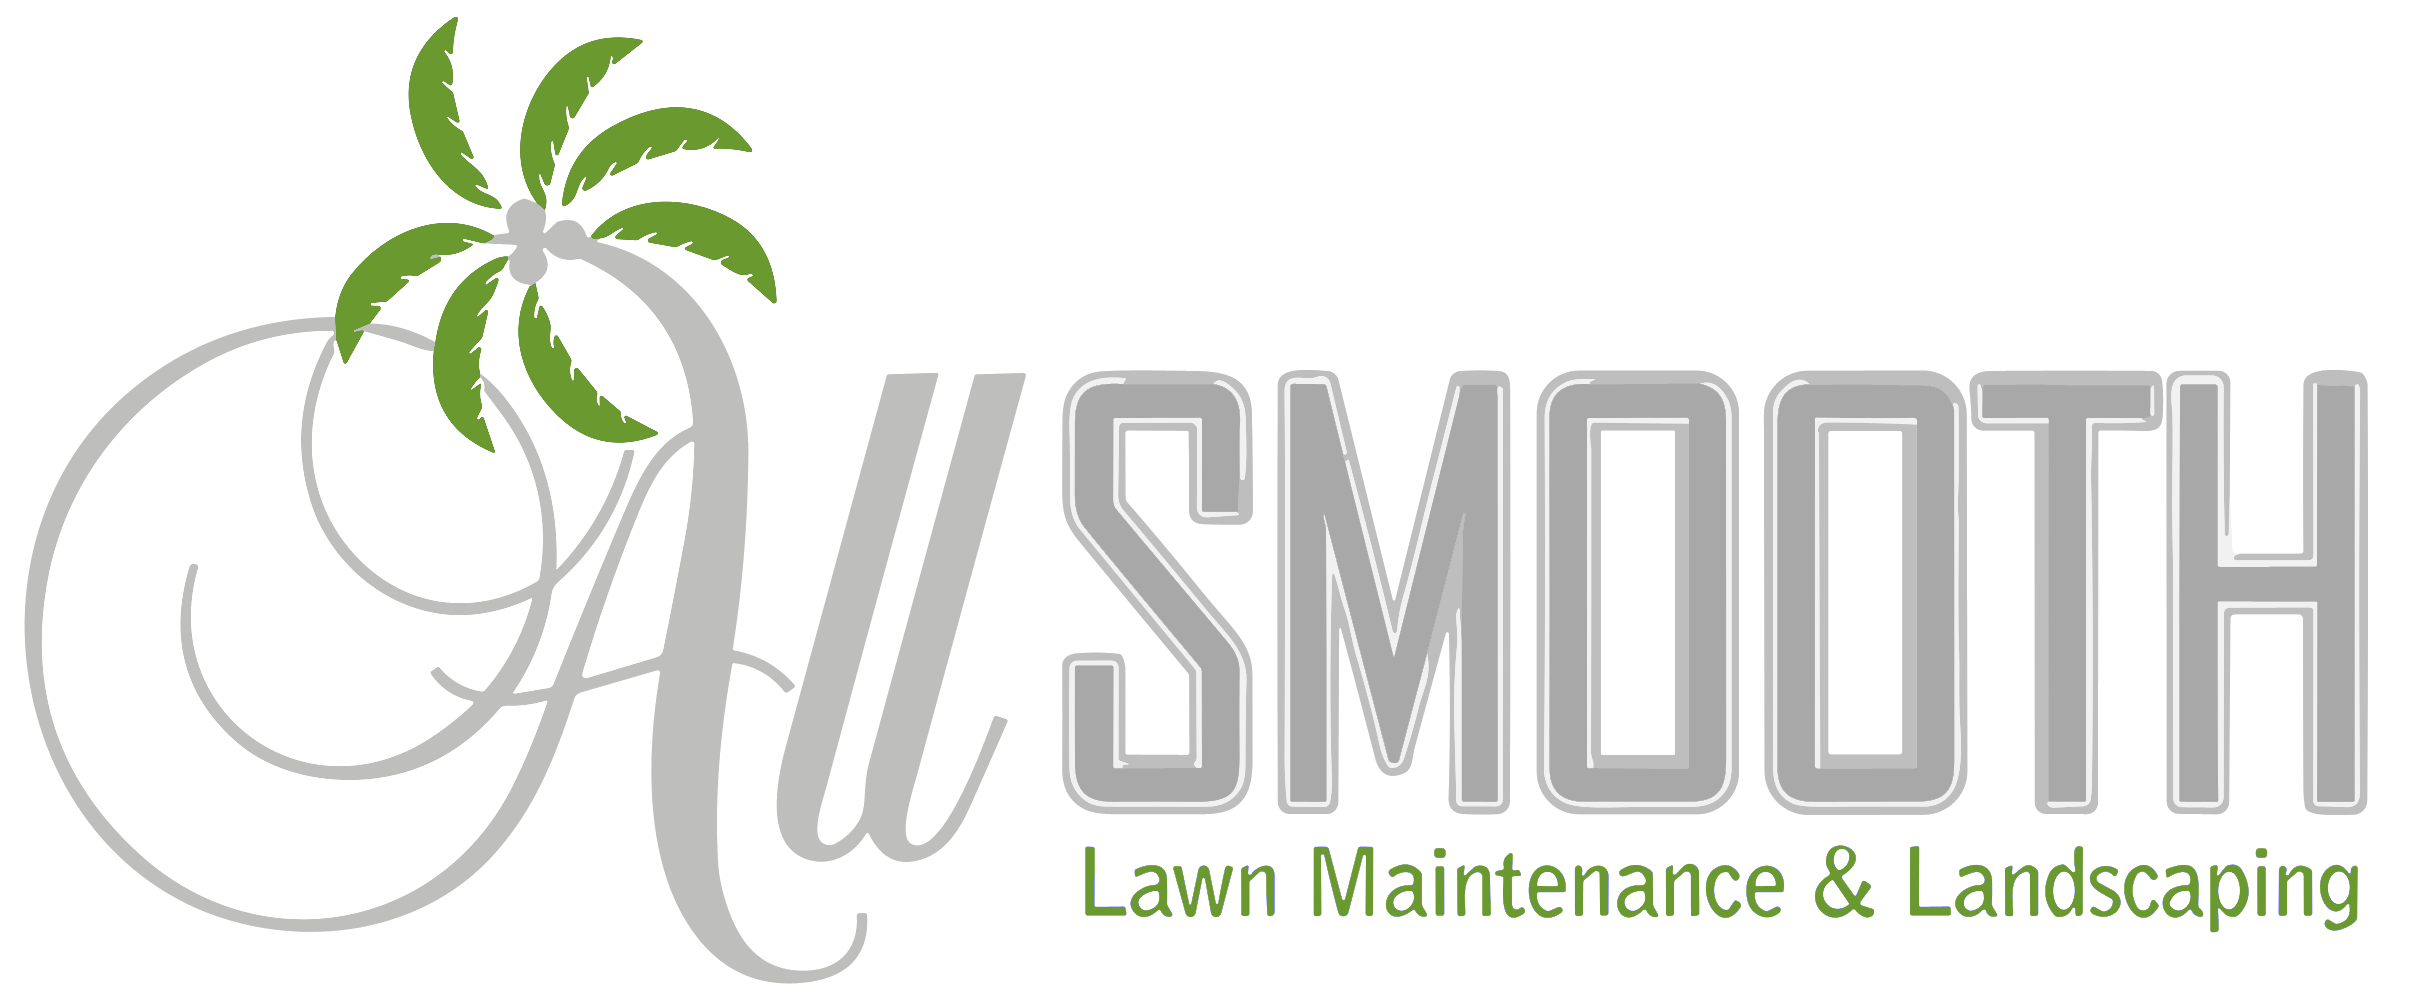 All Smooth Lawn Maintenance & Landscaping Inc.,